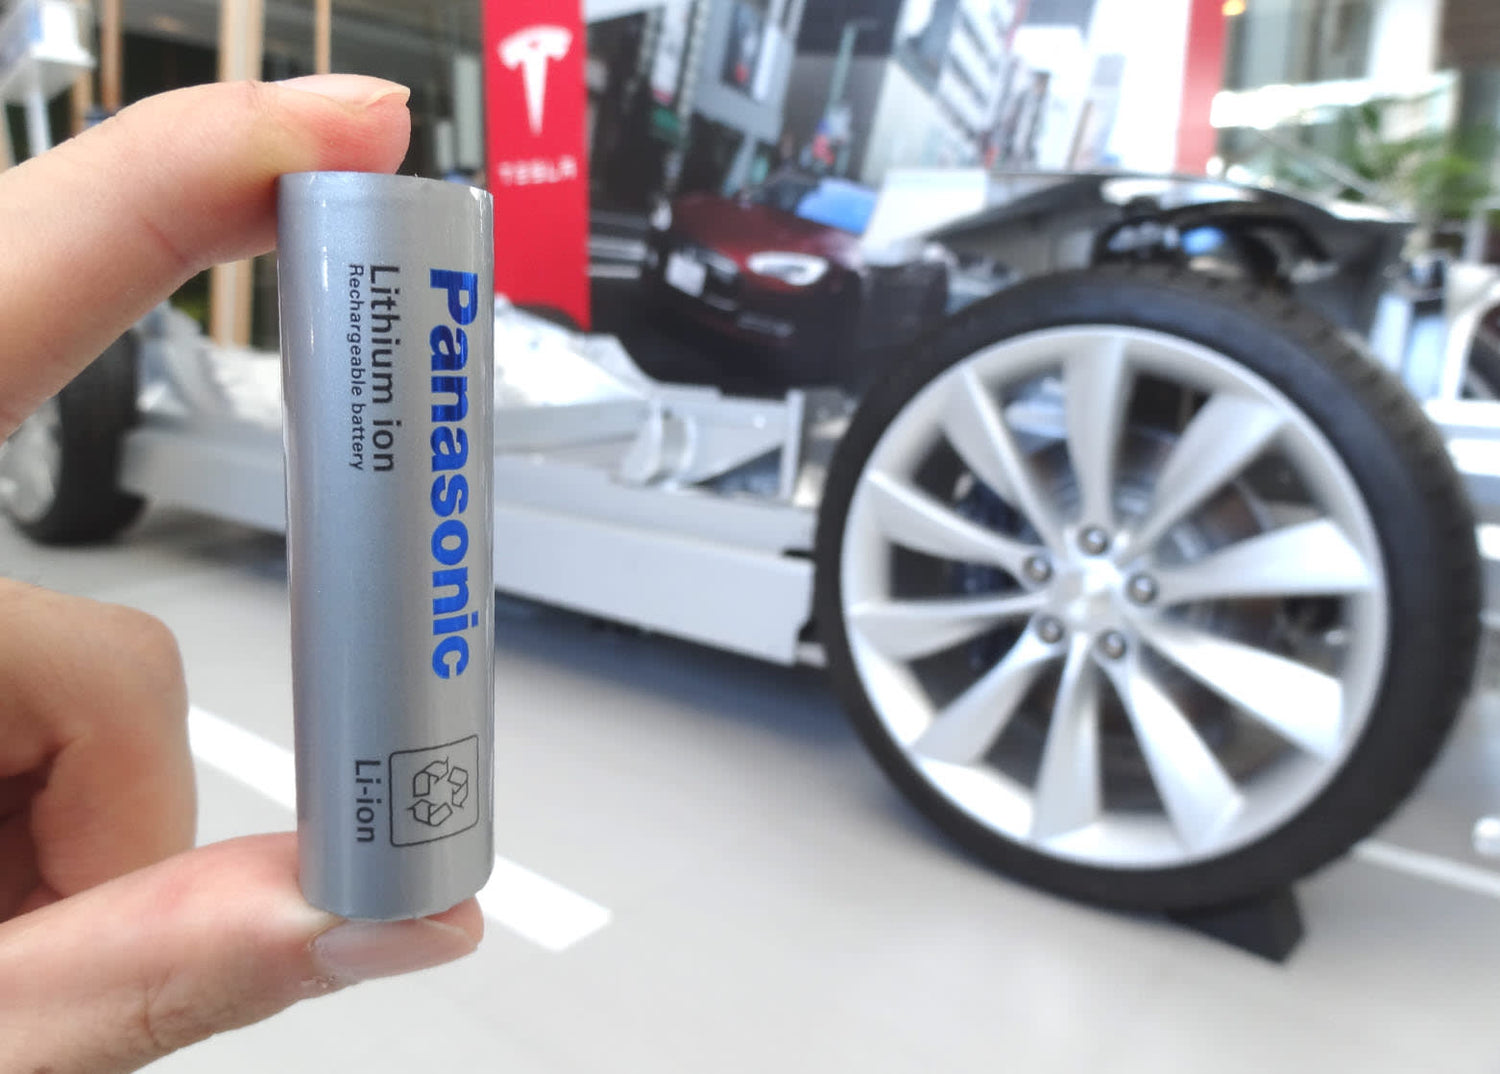 Tesla Latest 8-K Shows Entered 2020 Pricing Agreement With Panasonic On June 10th